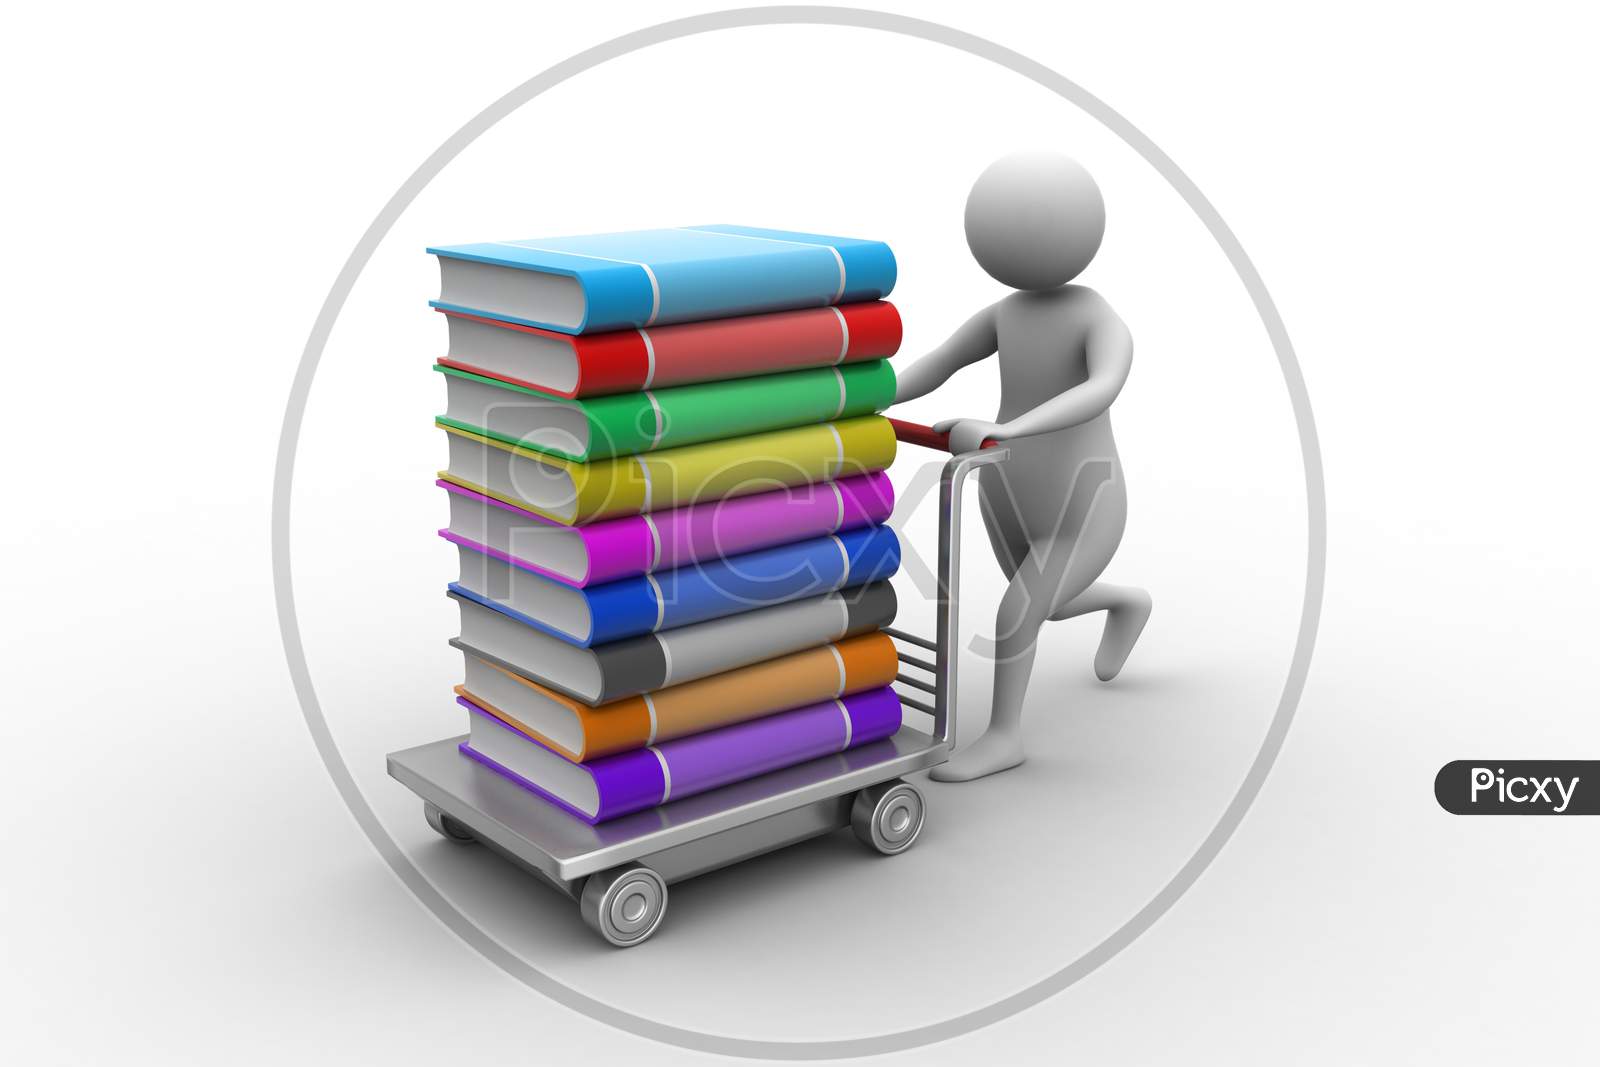 3d man pushing hand truck with books